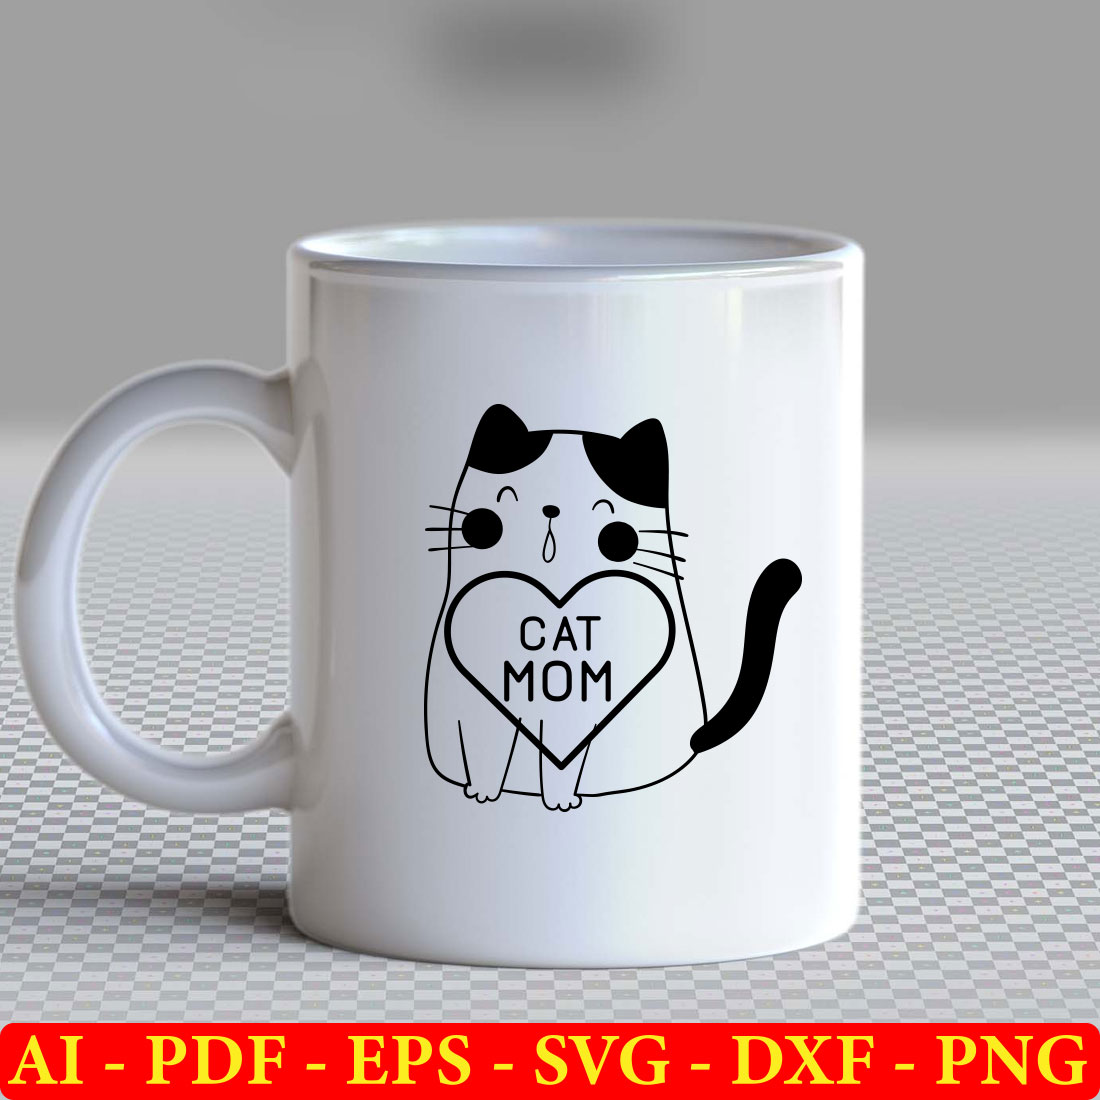 White coffee mug with a black cat holding a heart.